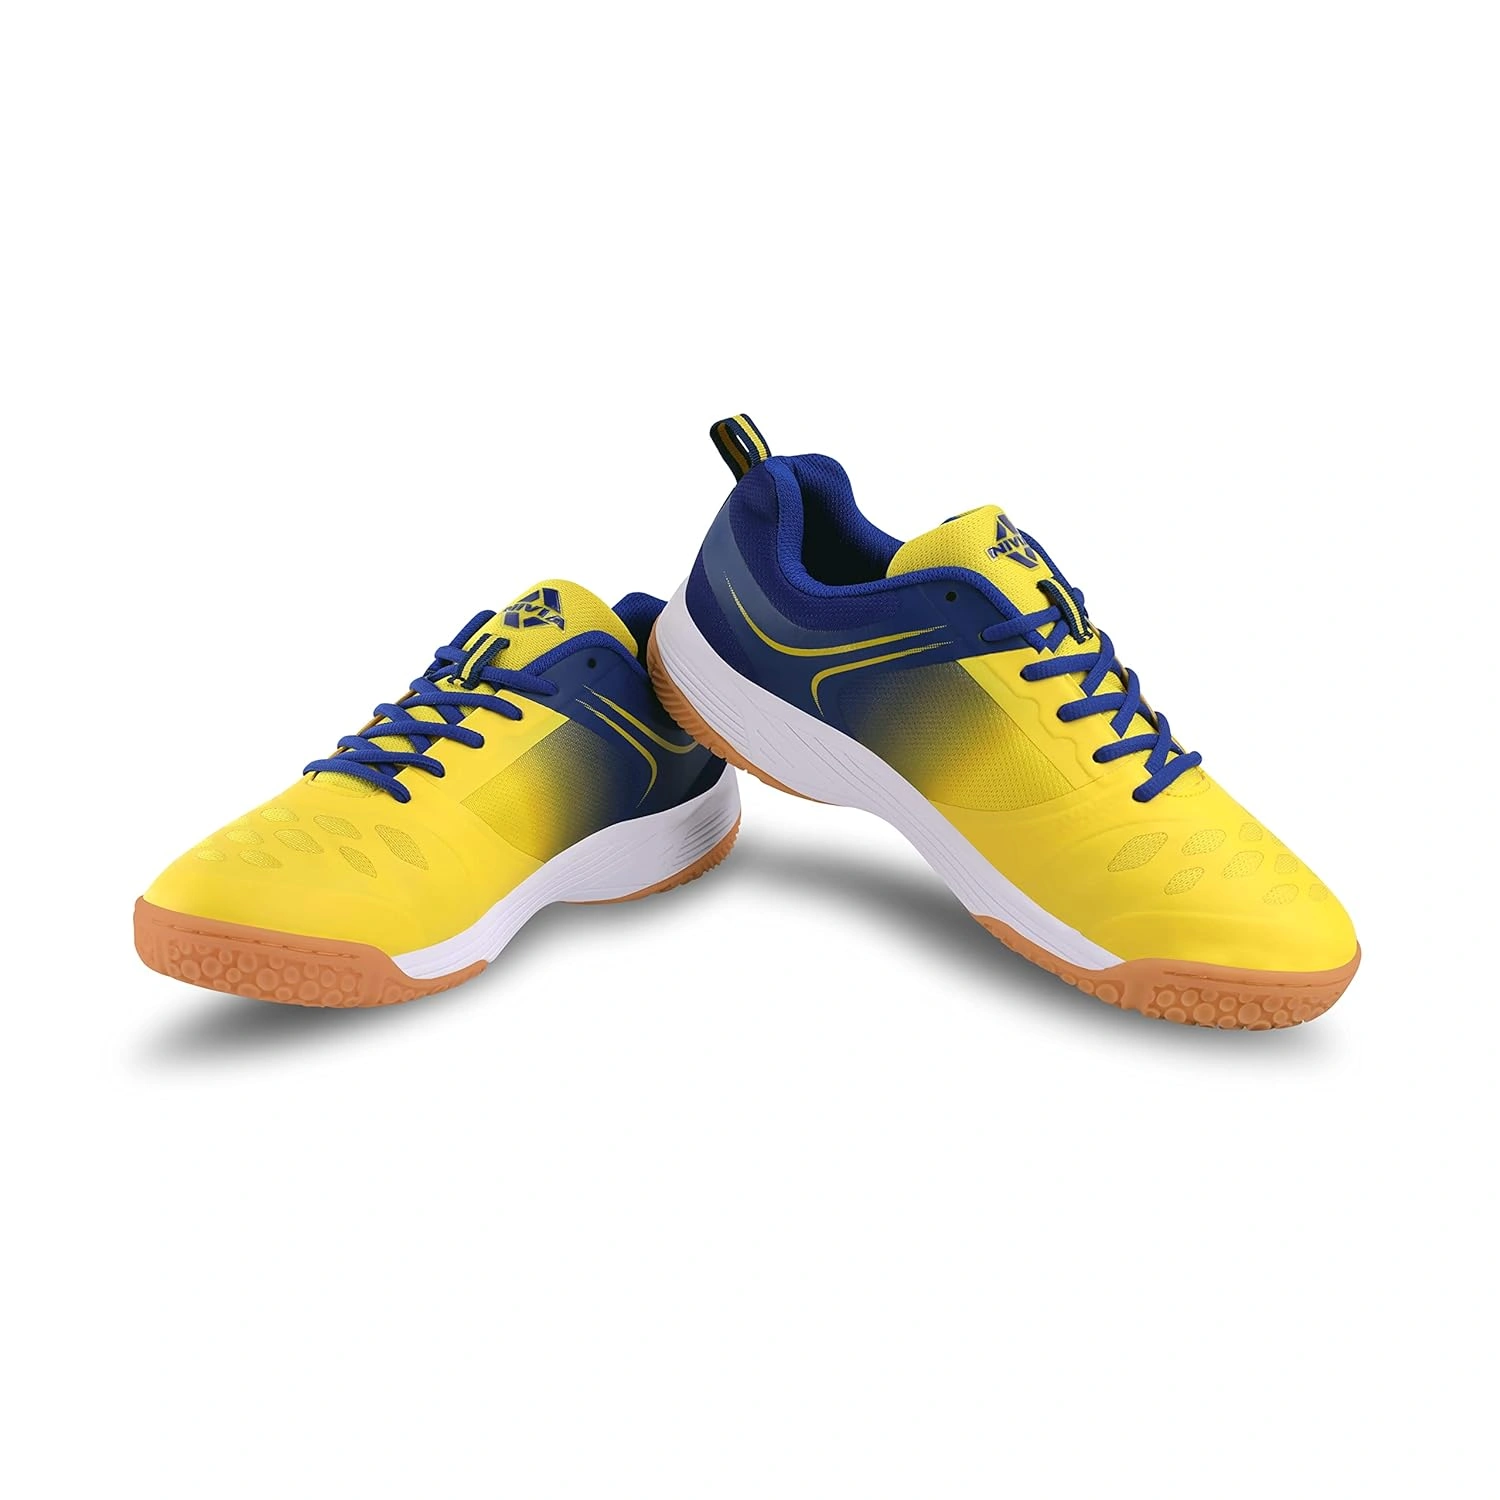 Nivia Hy-court 2.0 Badminton Shoes For Mens-YELL/ BLUE-10-5